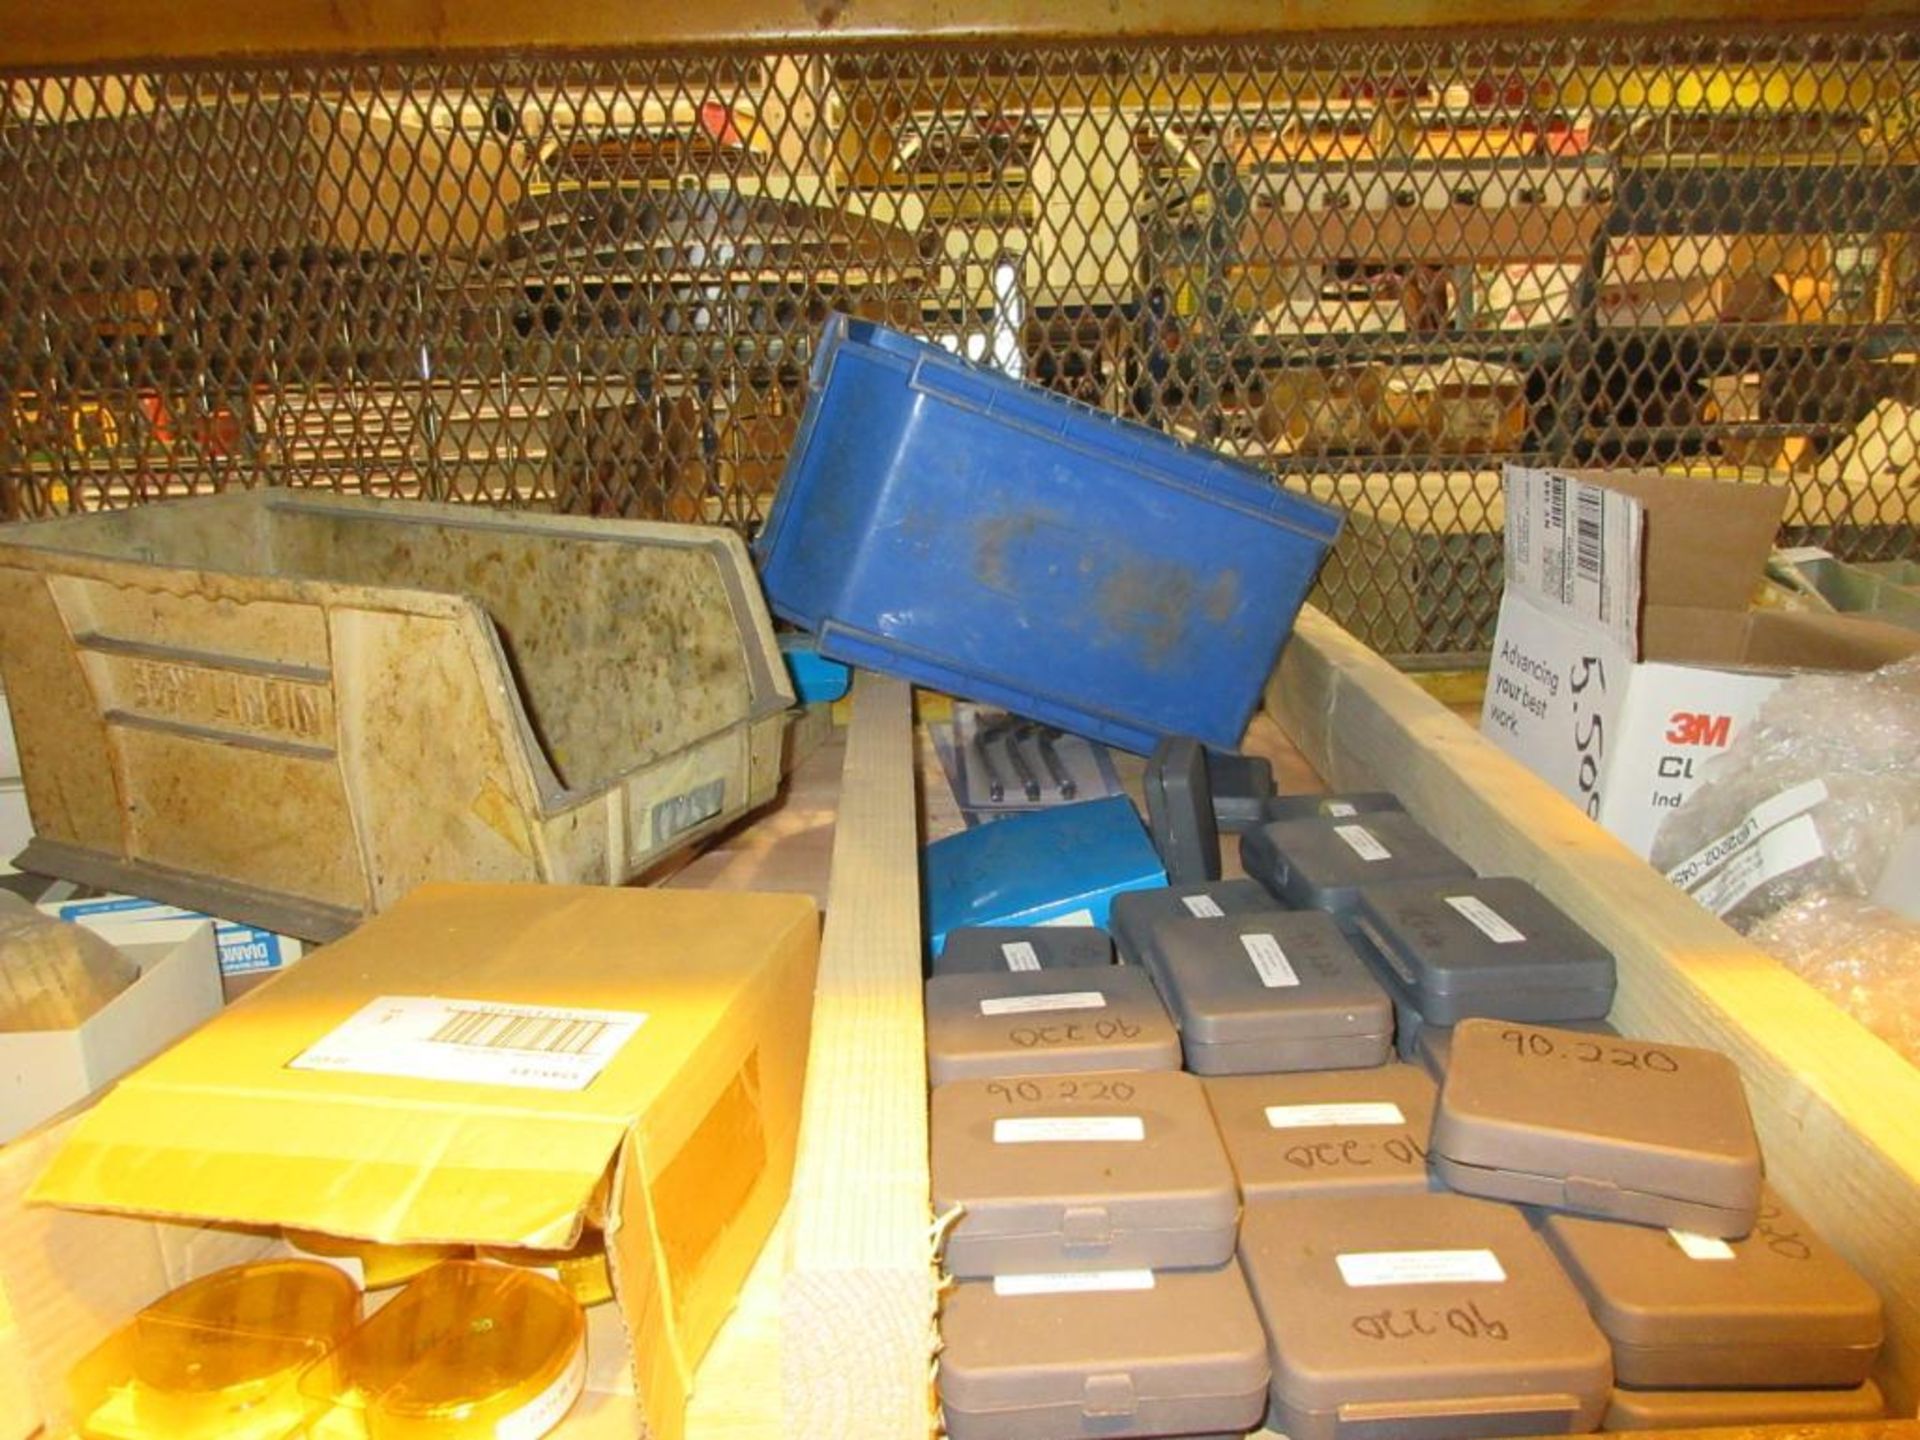 CONTENTS OF (22) SECTIONS PALLET RACK: ASSORTED ABRASIVES, SUNNEN STONES, TOOL BITS, DOVETAIL CUTTER - Image 37 of 43